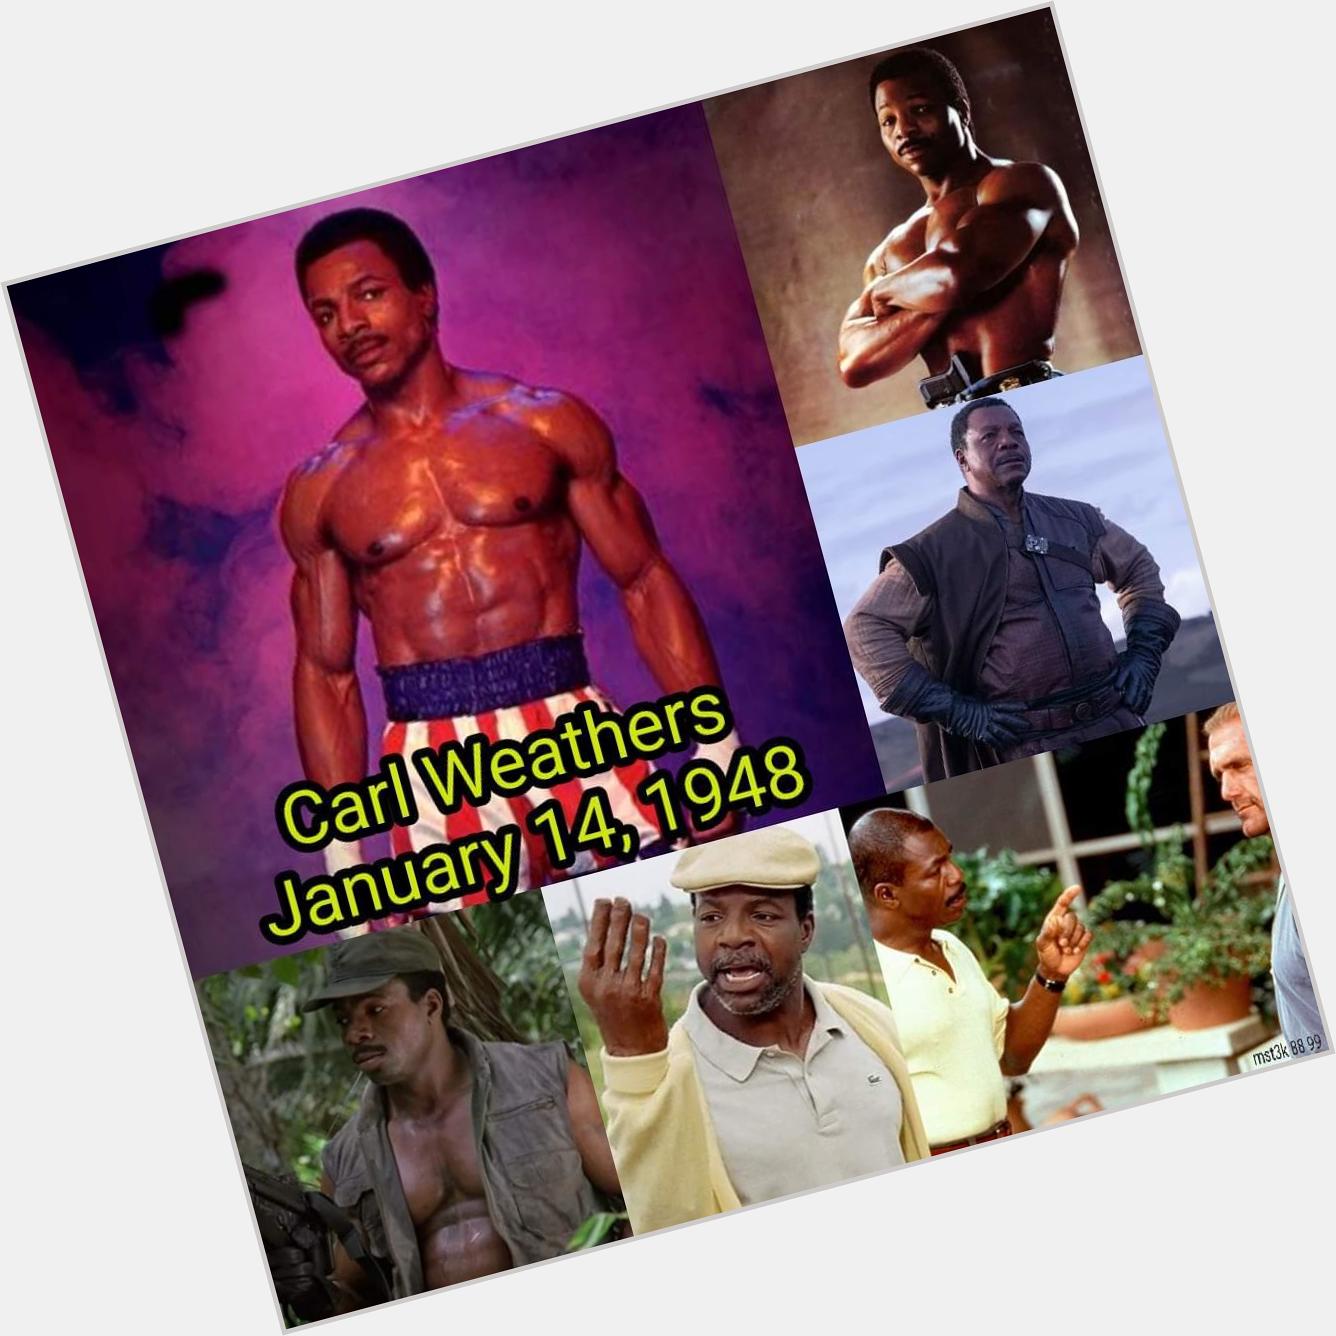 Happy Birthday to the great Carl Weathers 